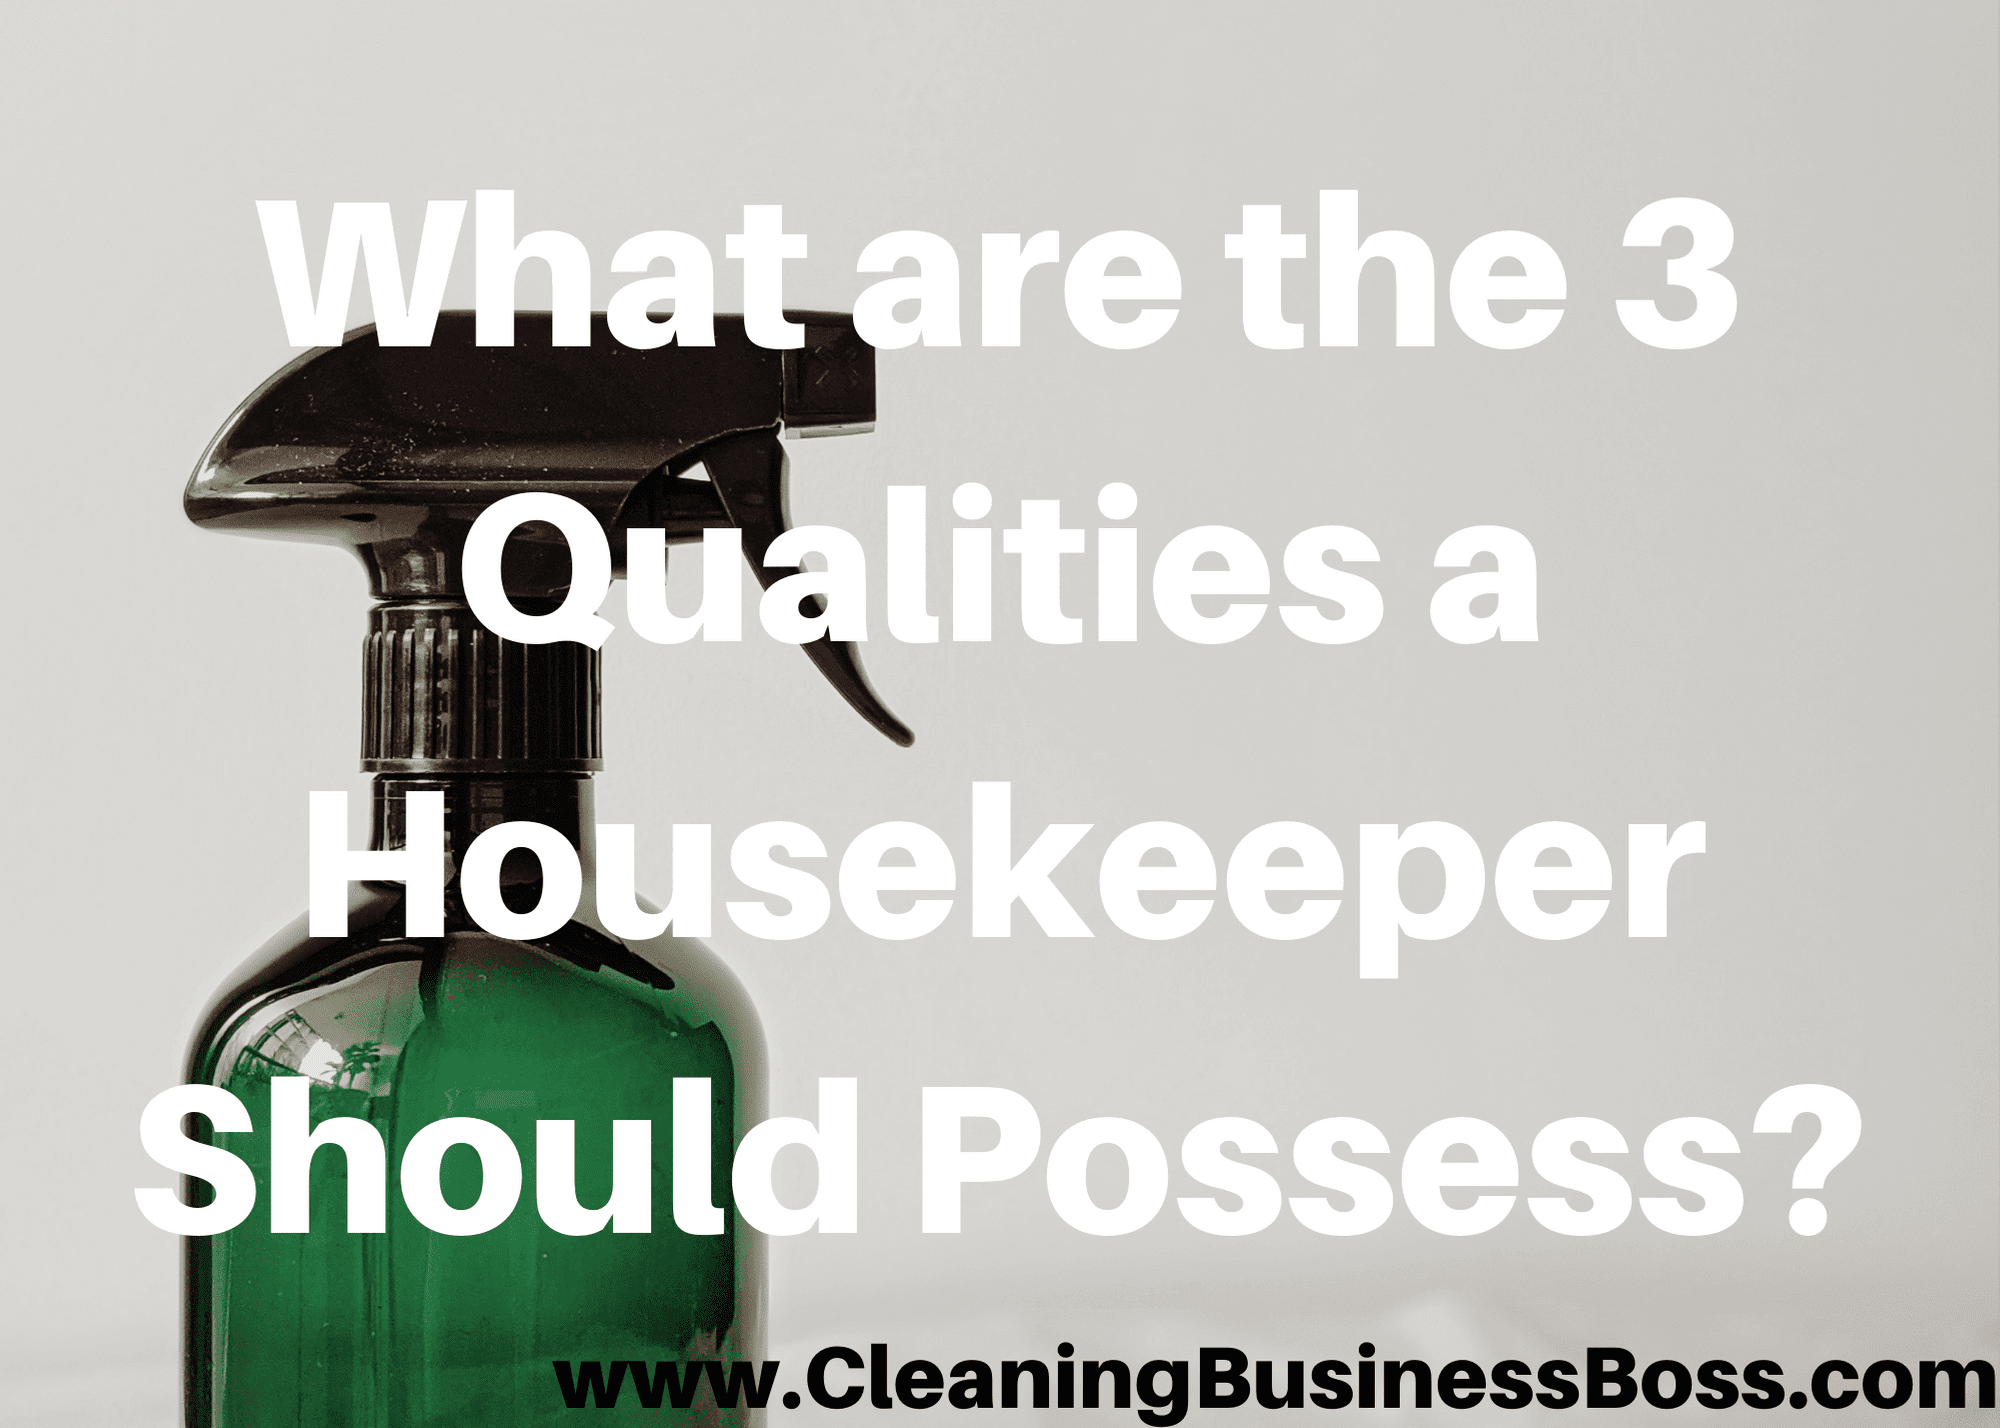 What Are The 3 Qualities A Housekeeper Should Possess? 